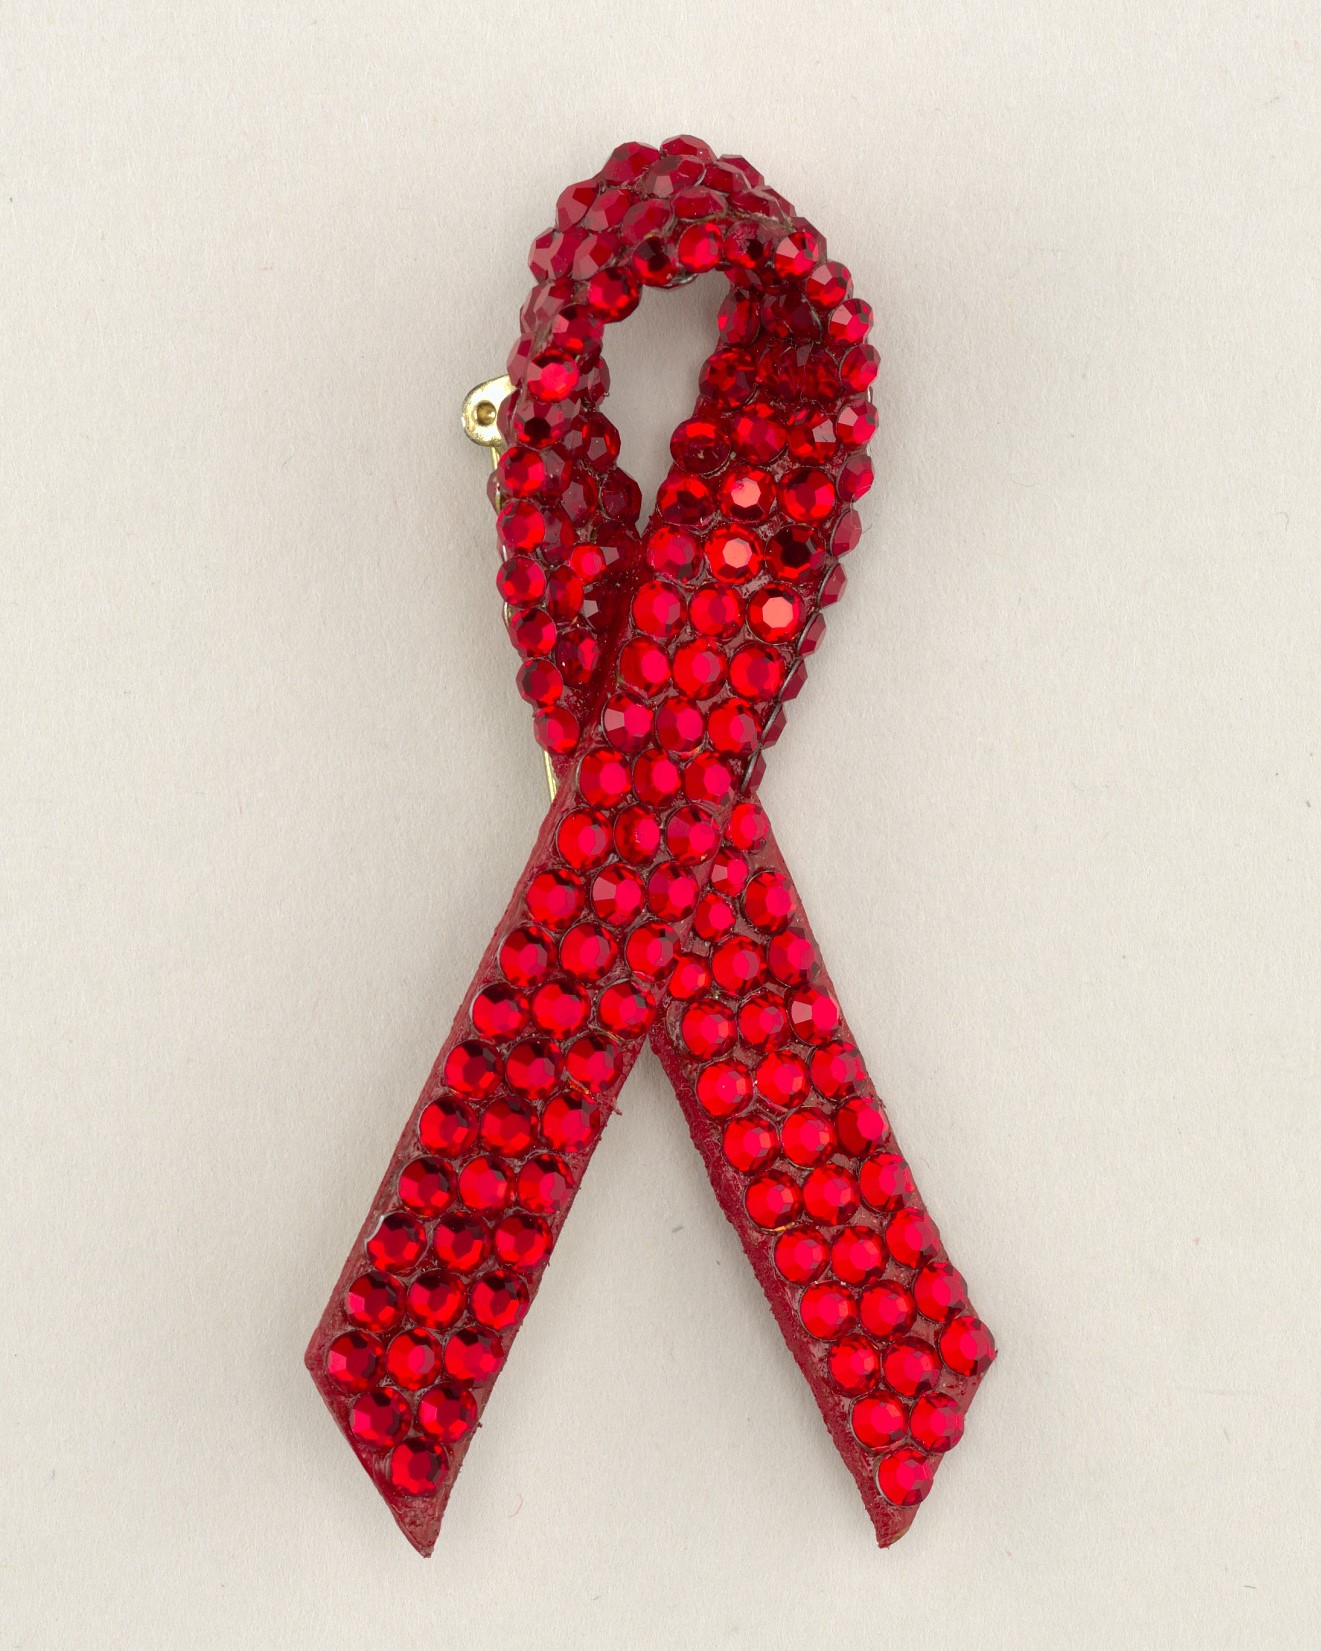 Jeweled pin in the shape of a looped red ribbon.